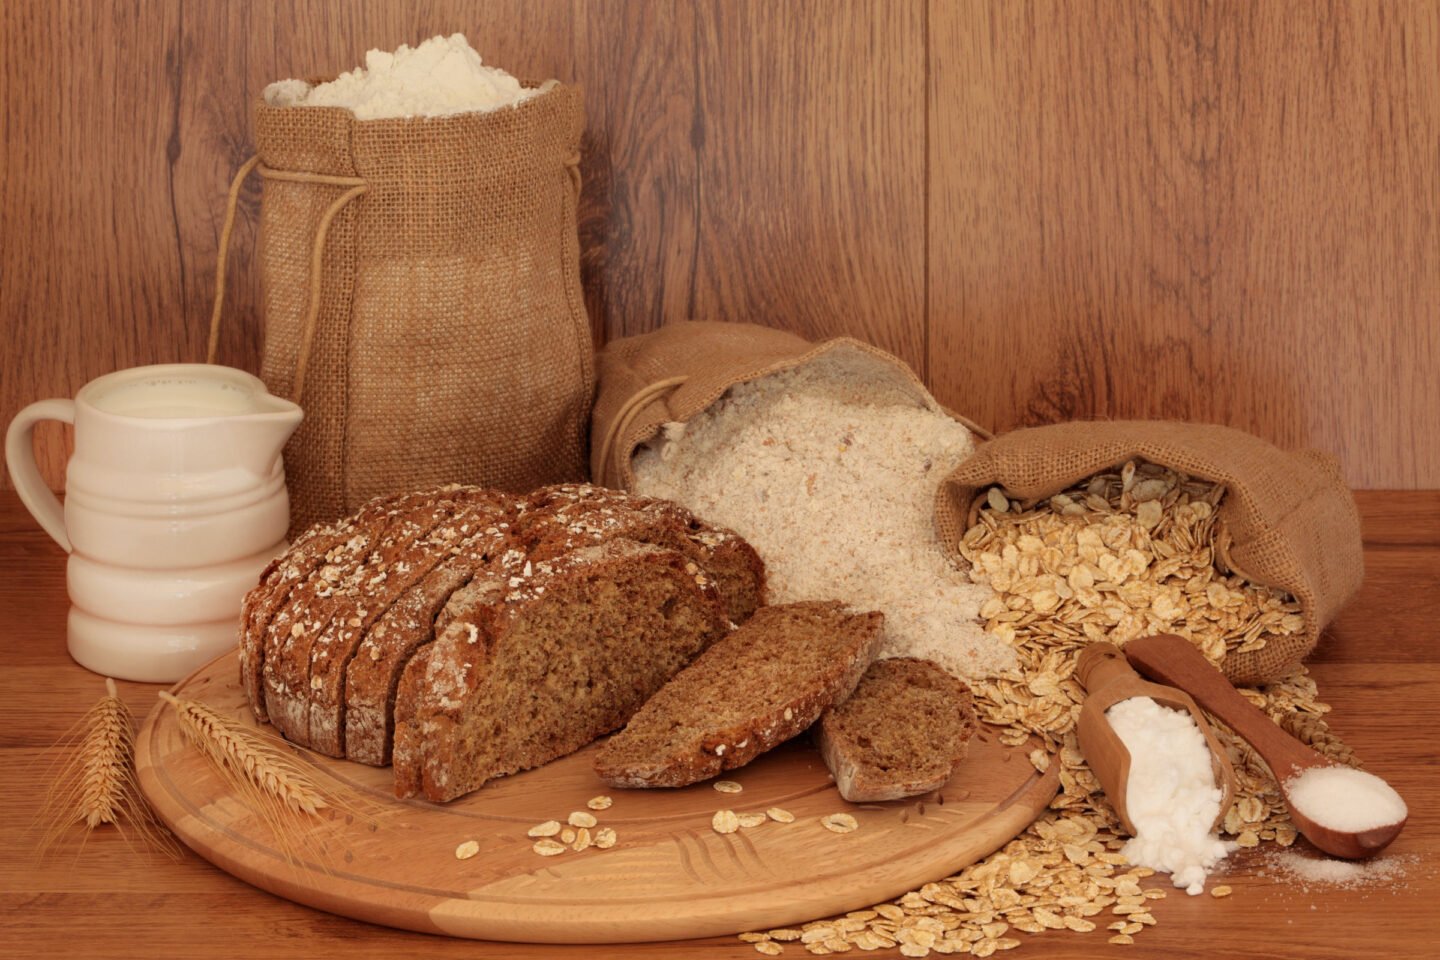 soda bread with oats and other ingredients